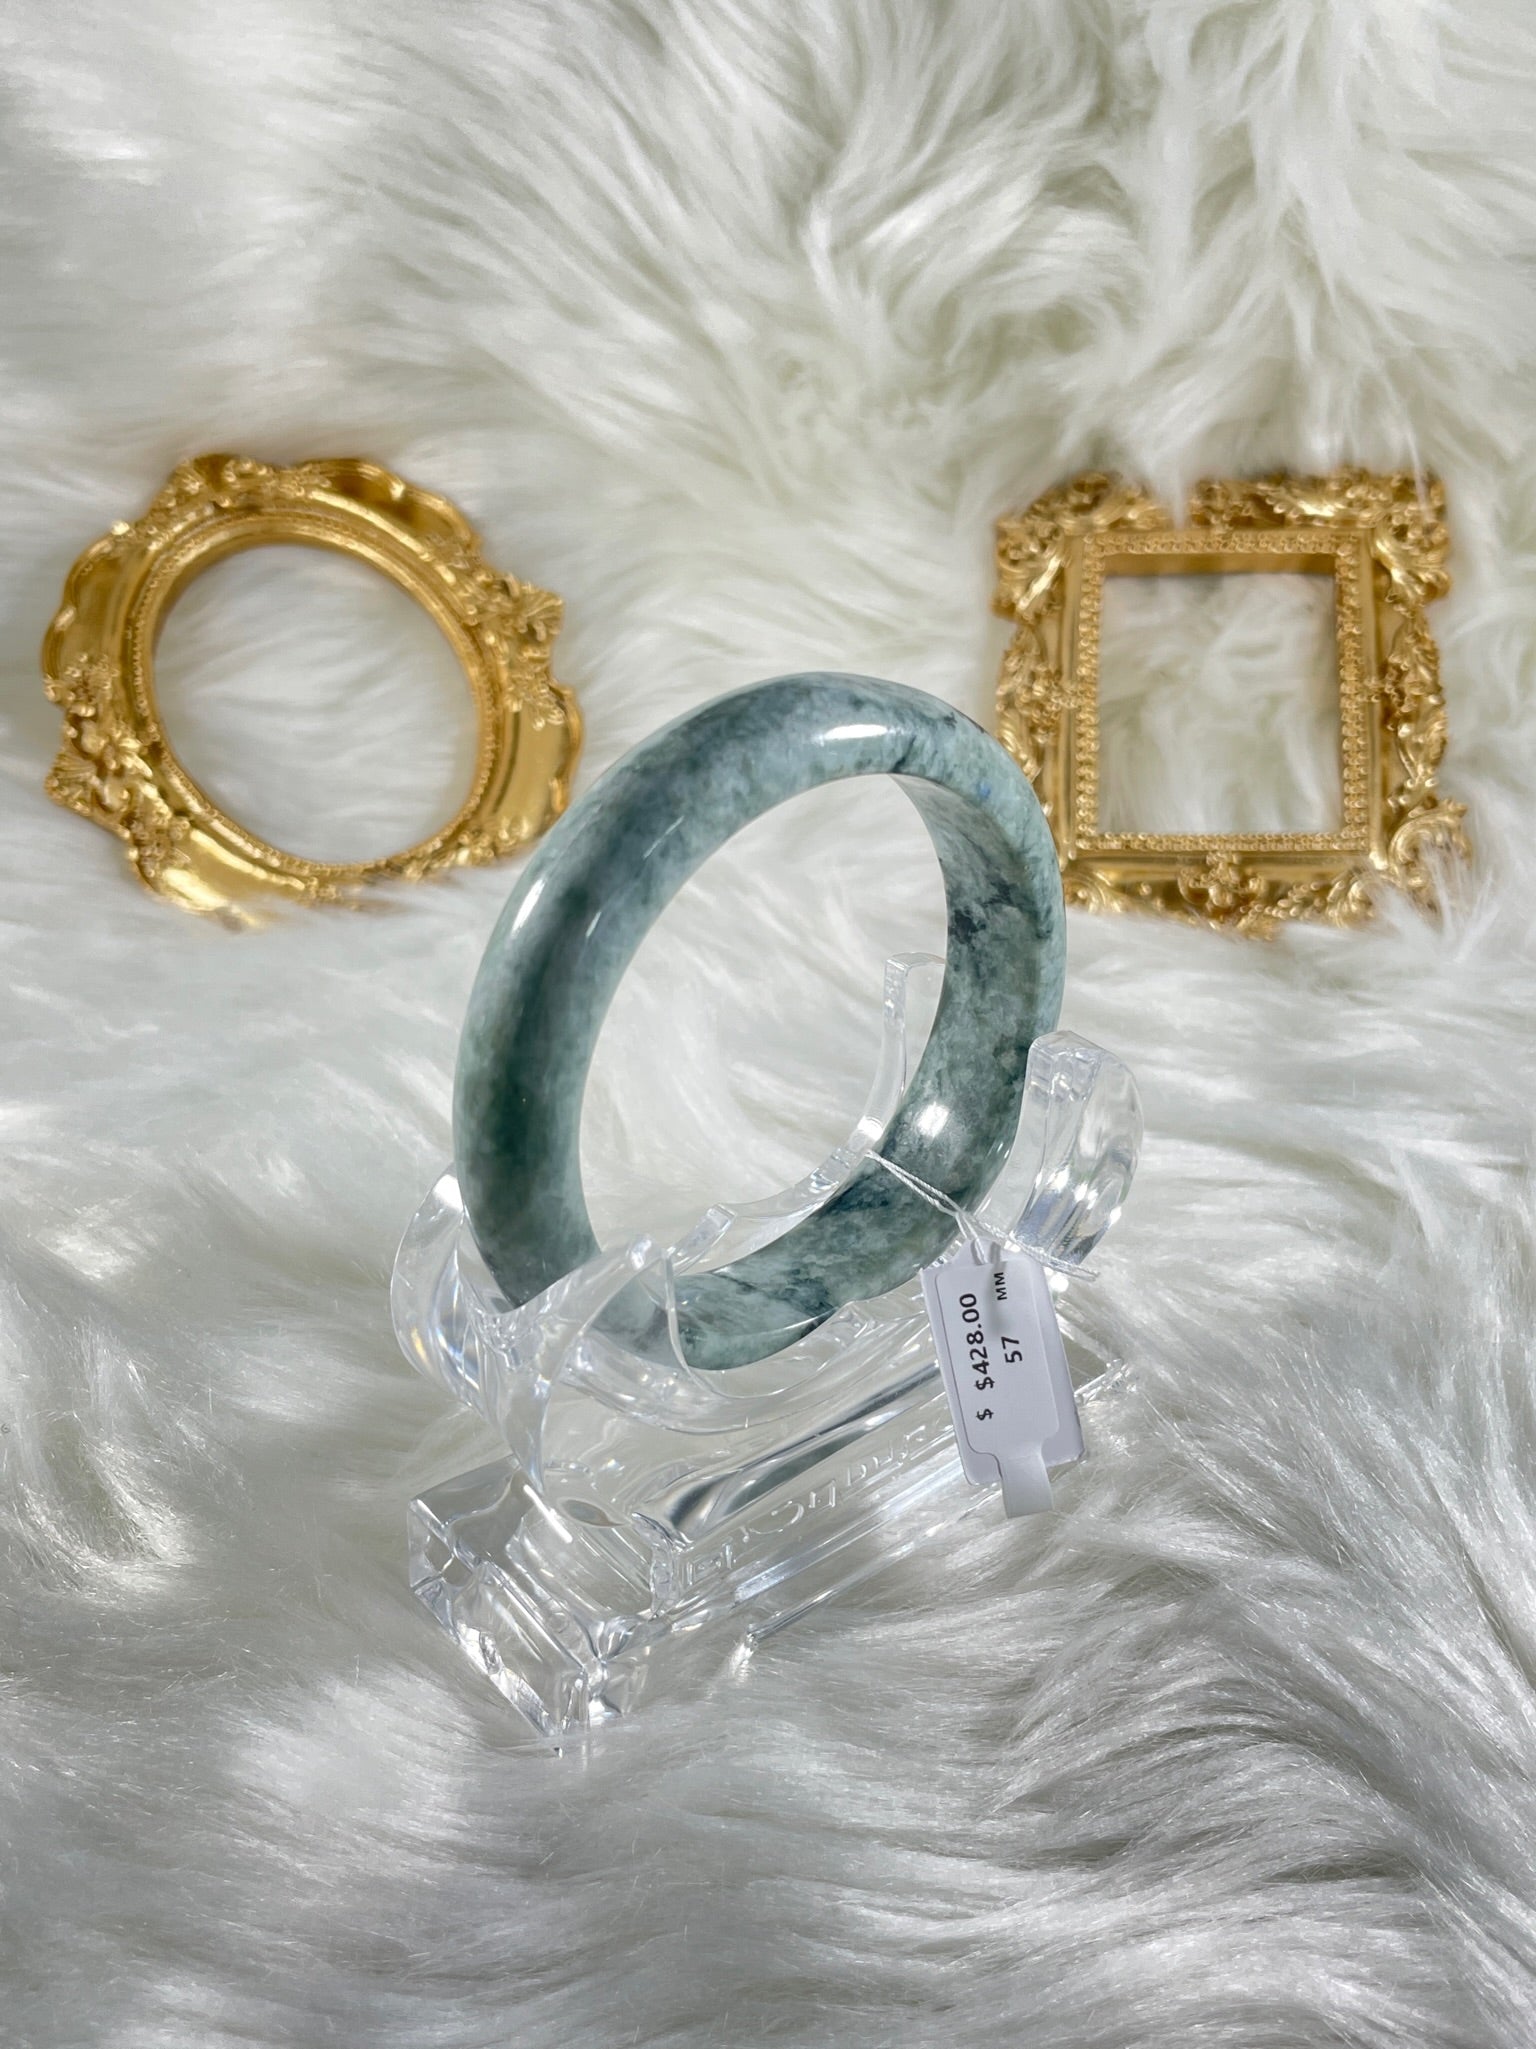 Grade A Natural Jade Bangle with certificate #37158